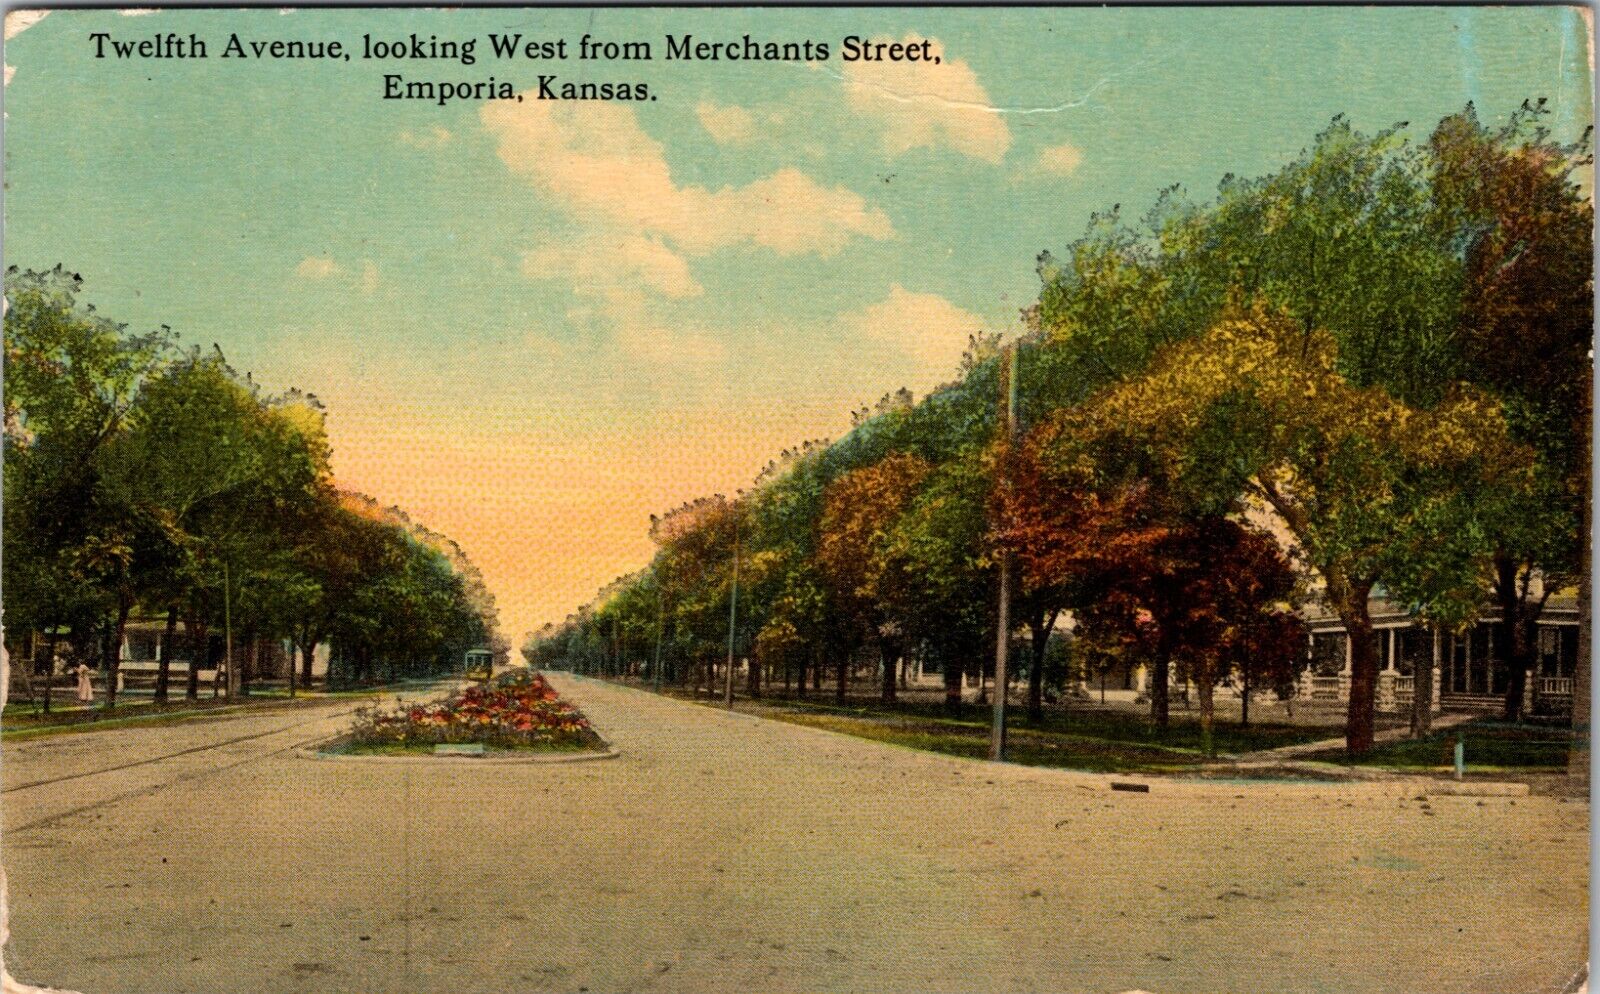 Post Card 1912 Emporia Kansas 12th Ave looking west from Merchants St.